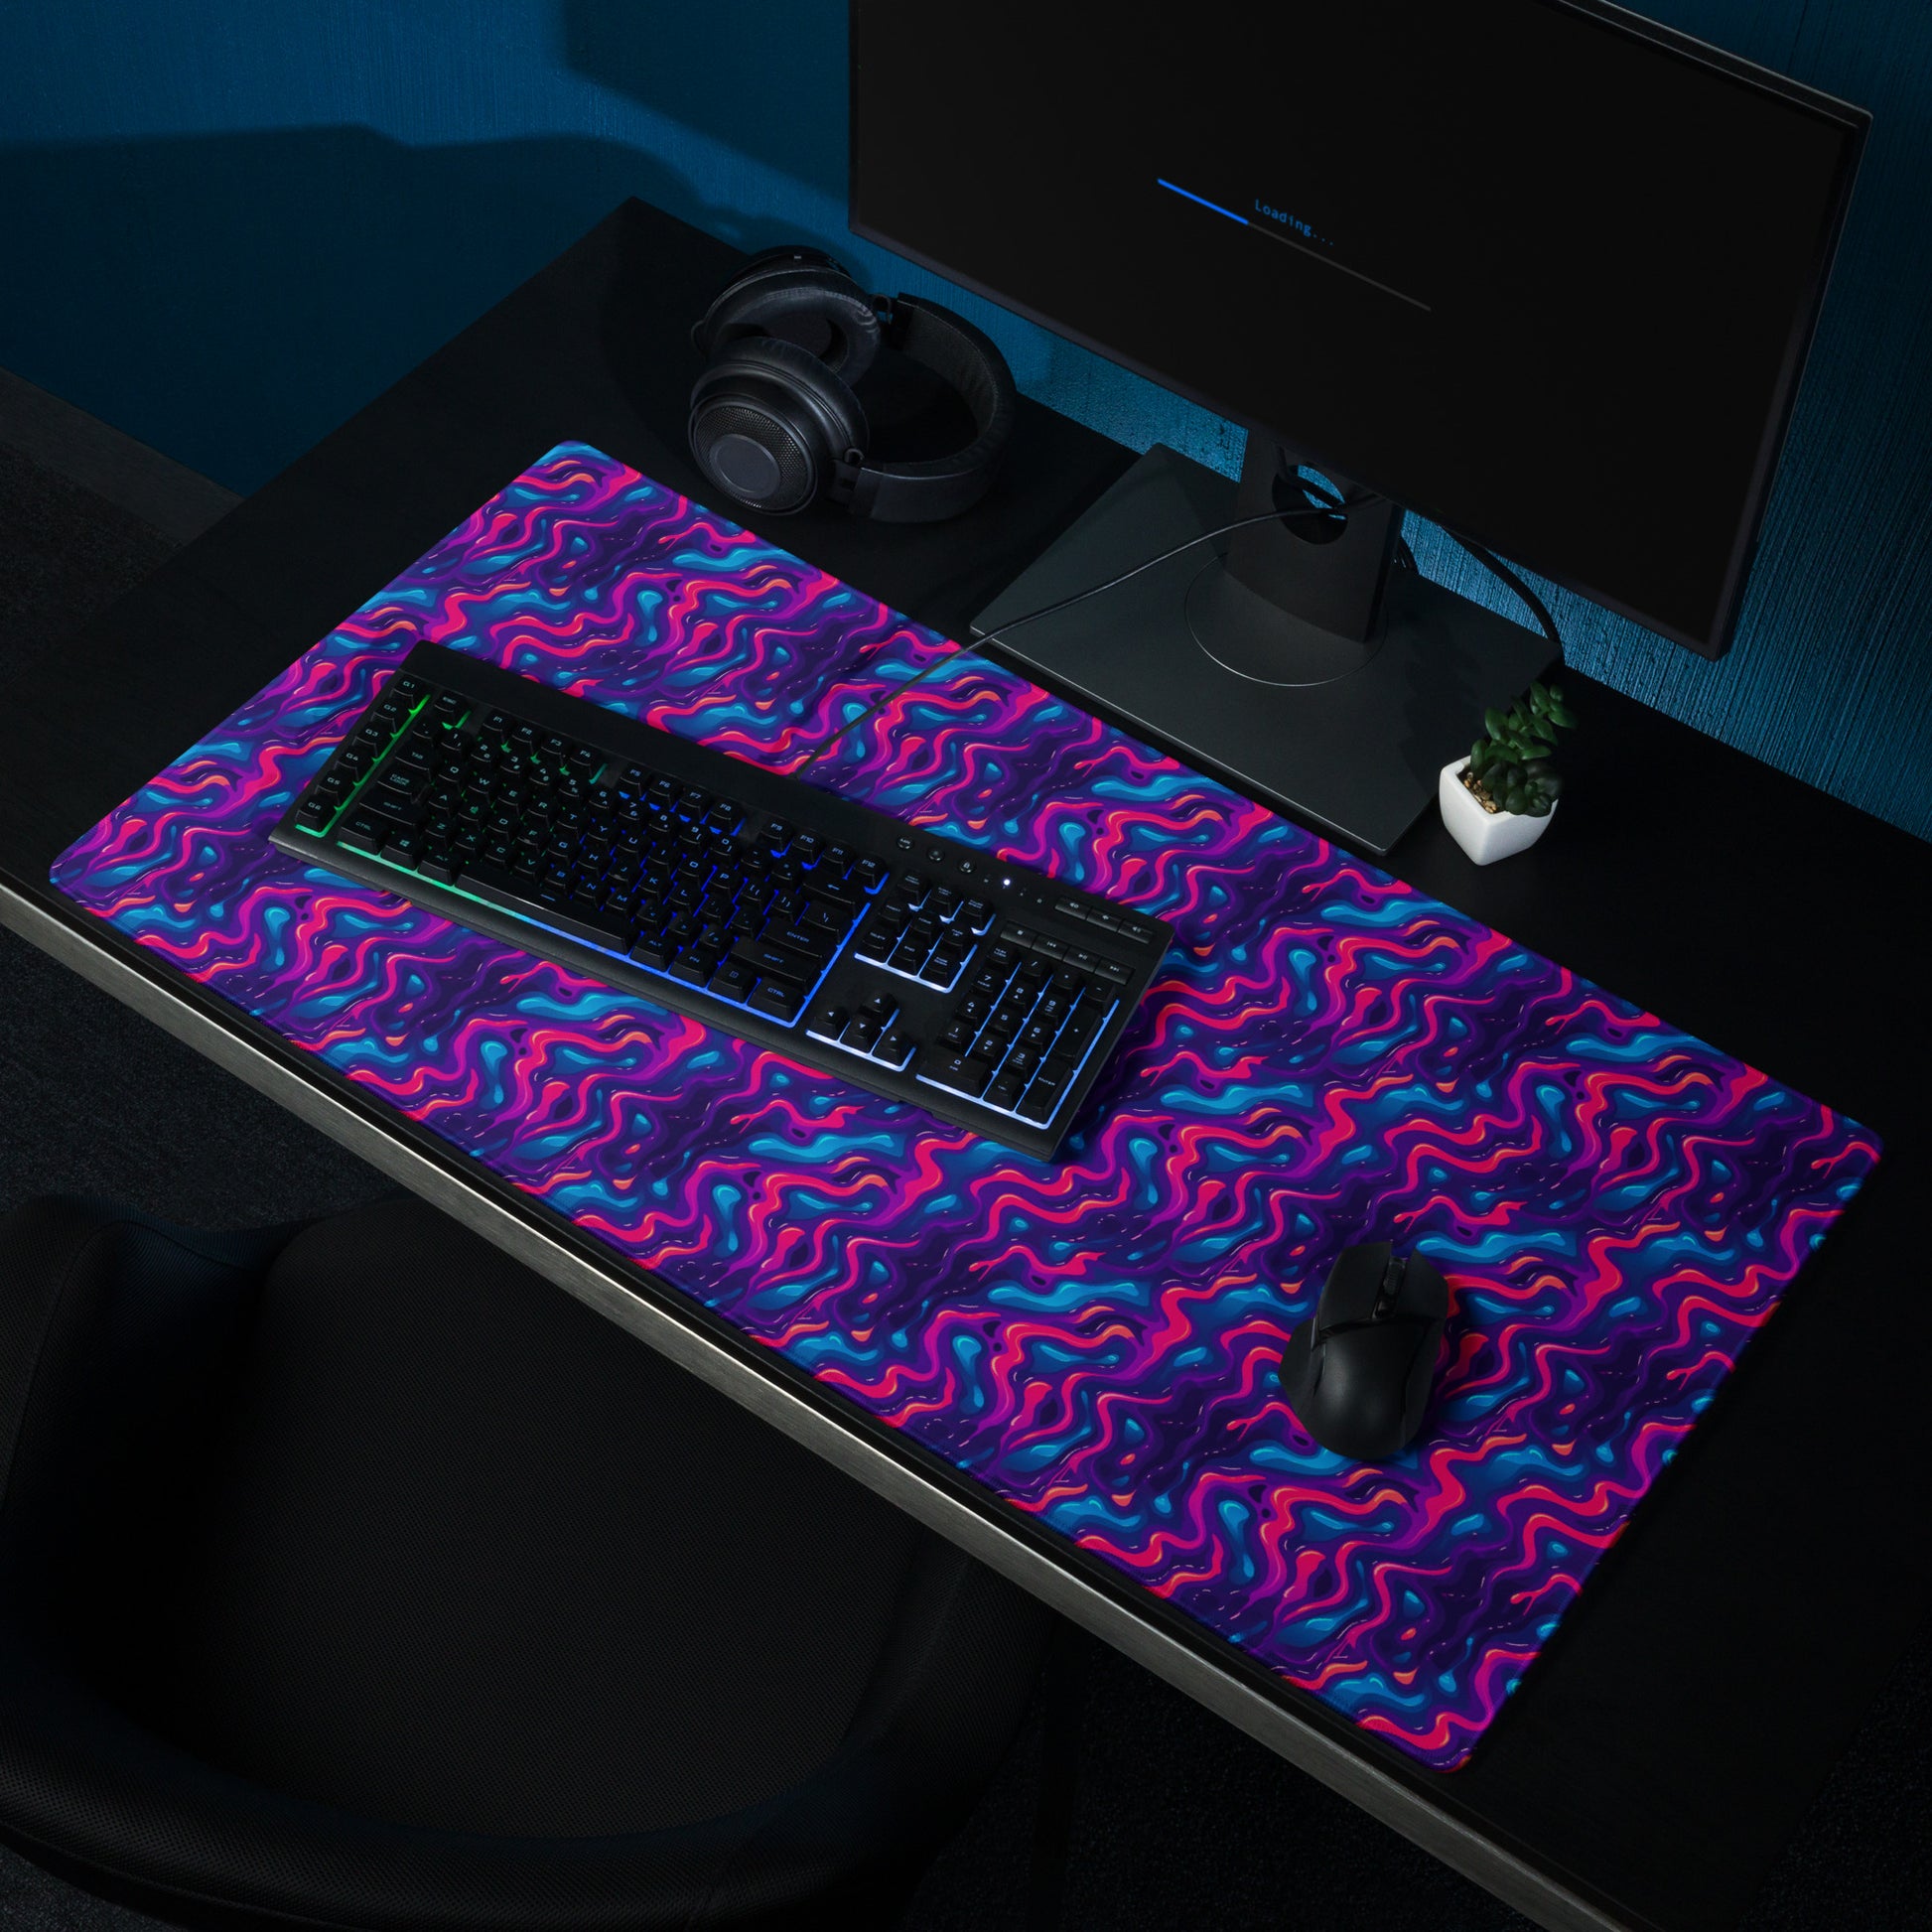 A 36" x 18" desk pad with a pink, blue and purple wavy pattern sitting on a desk.